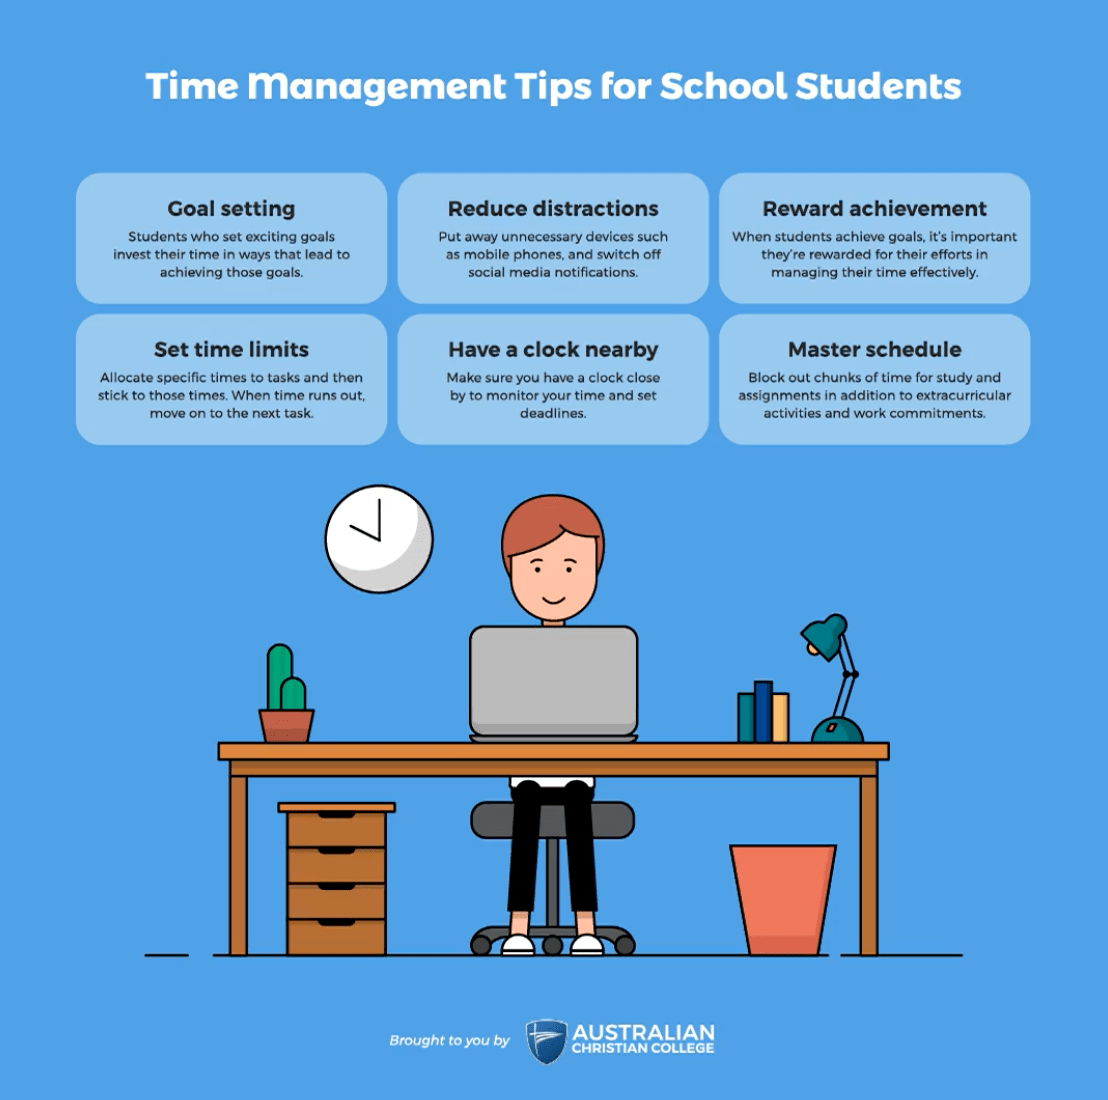 Why is Time Management Important for Students?